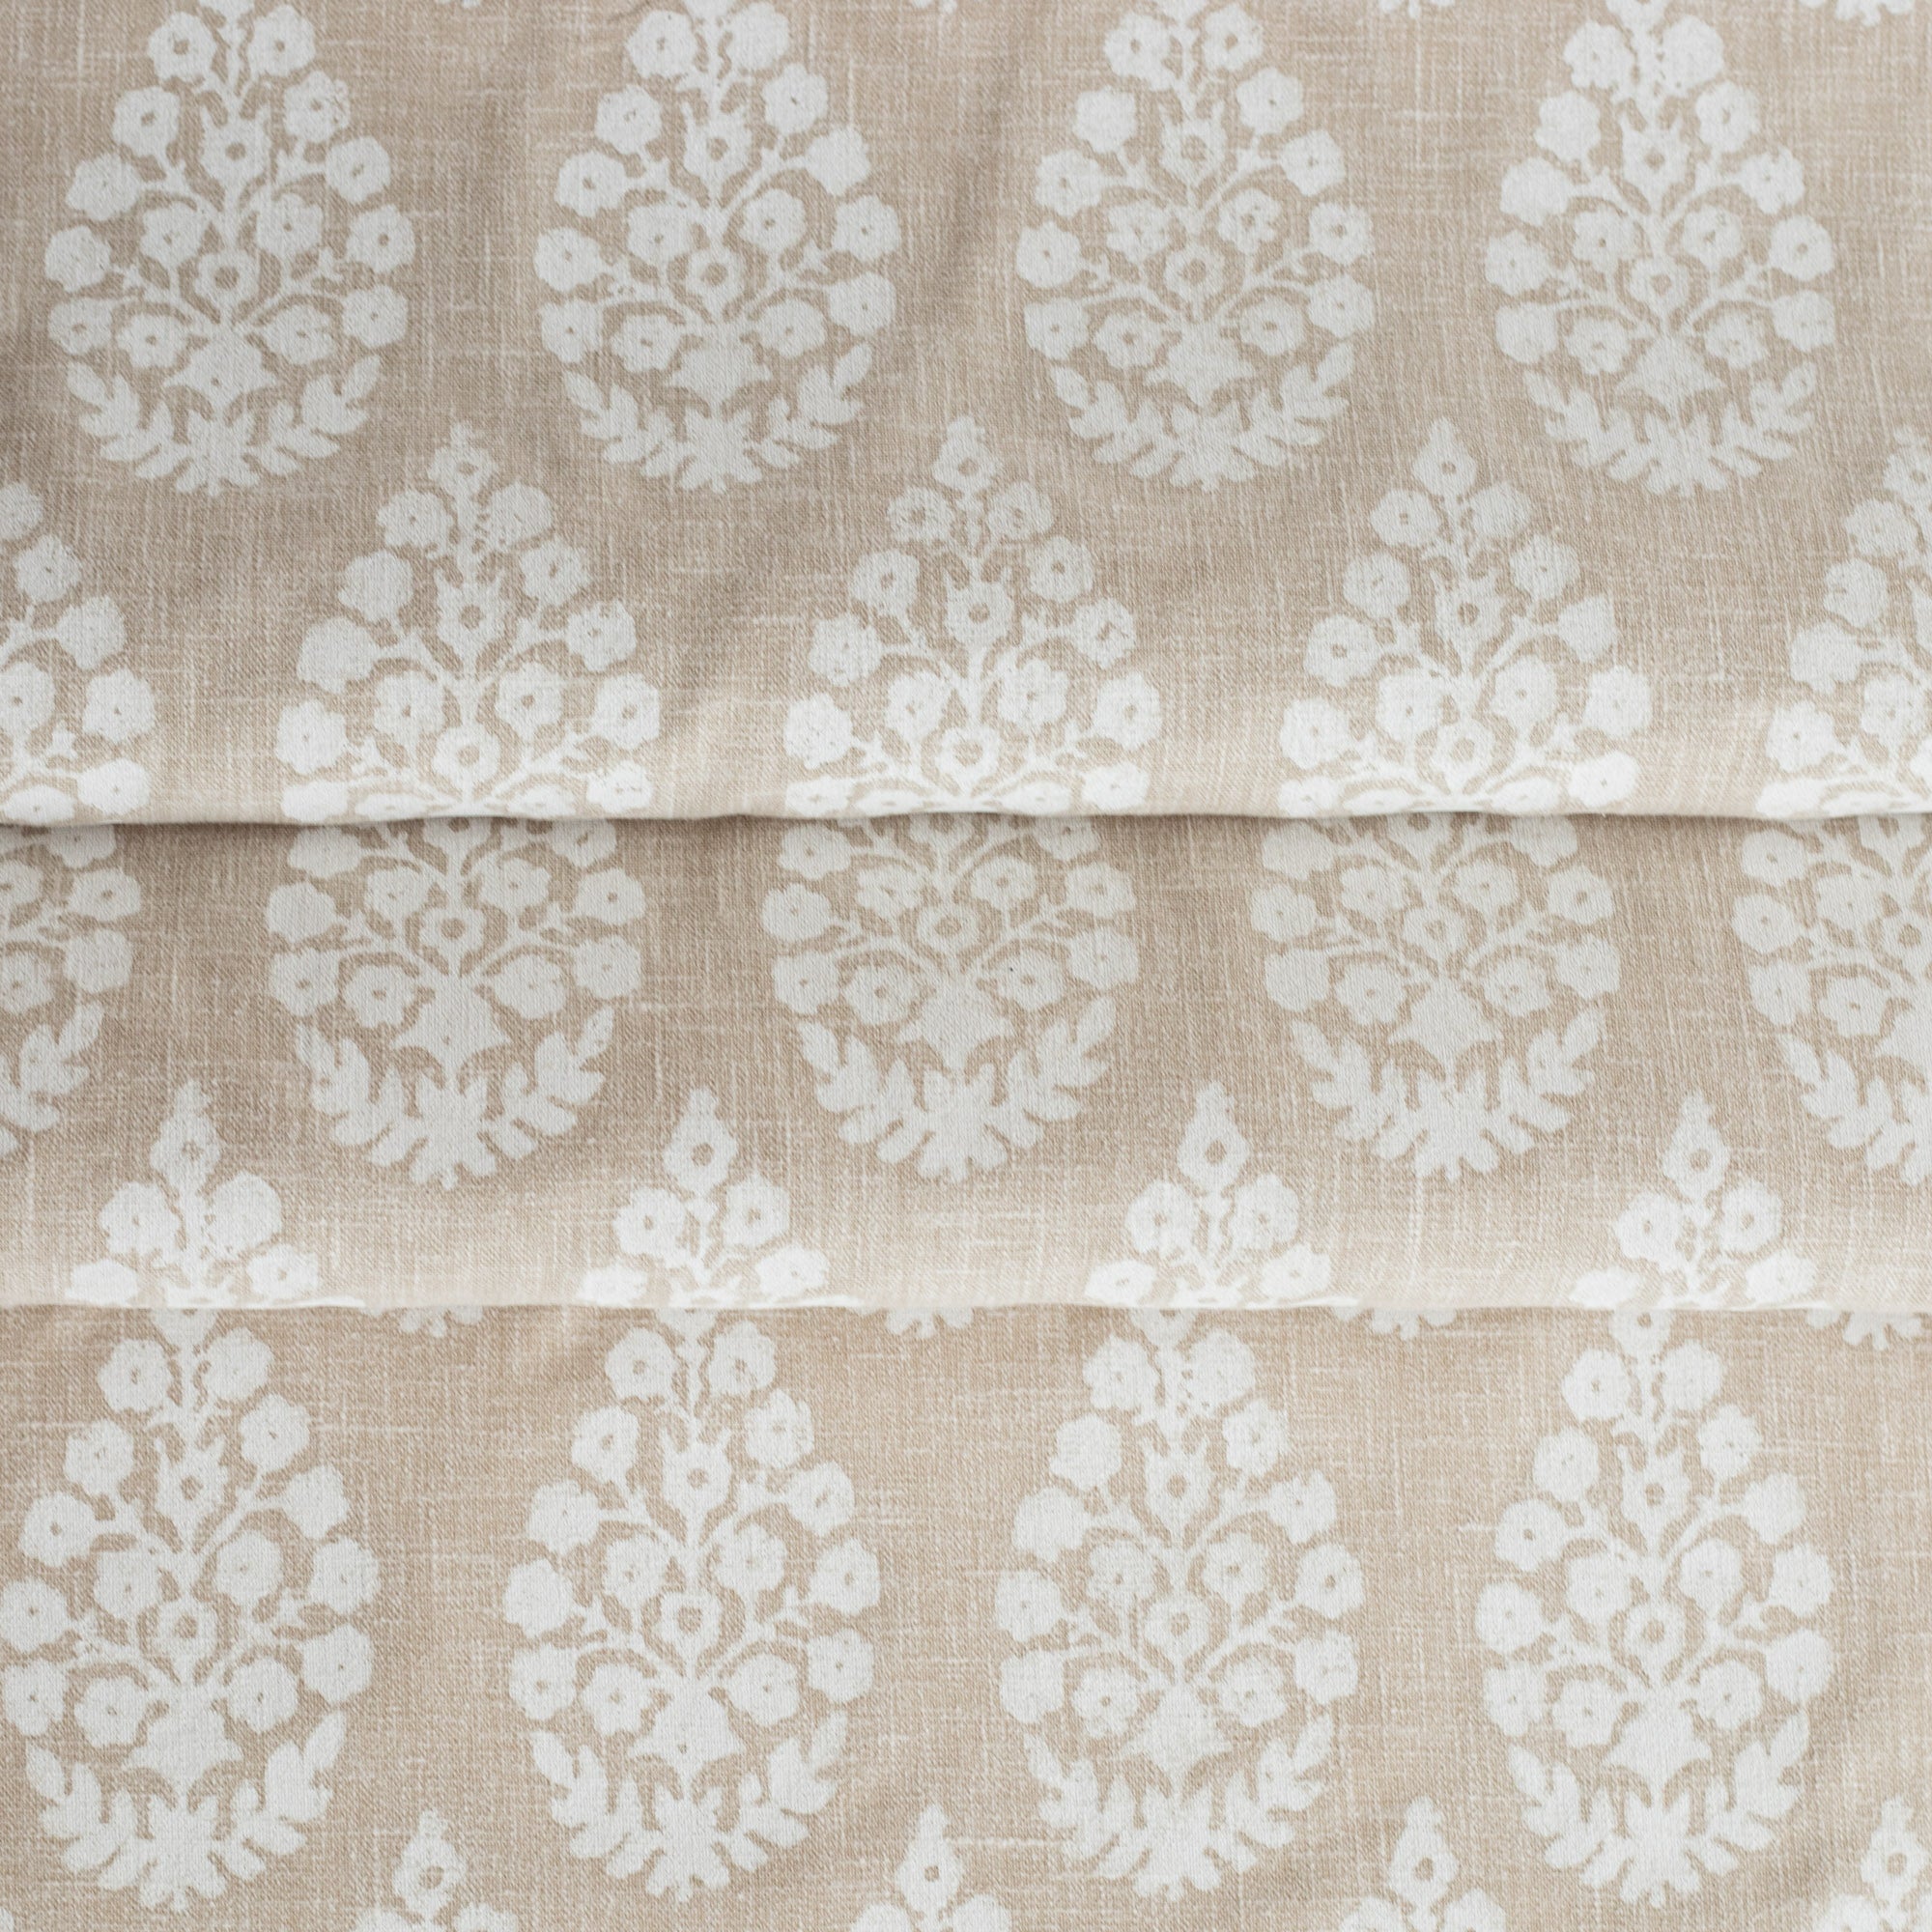 Chandra Beige Bisque, a white and sandy oatmeal floral block print fabric from Tonic Living